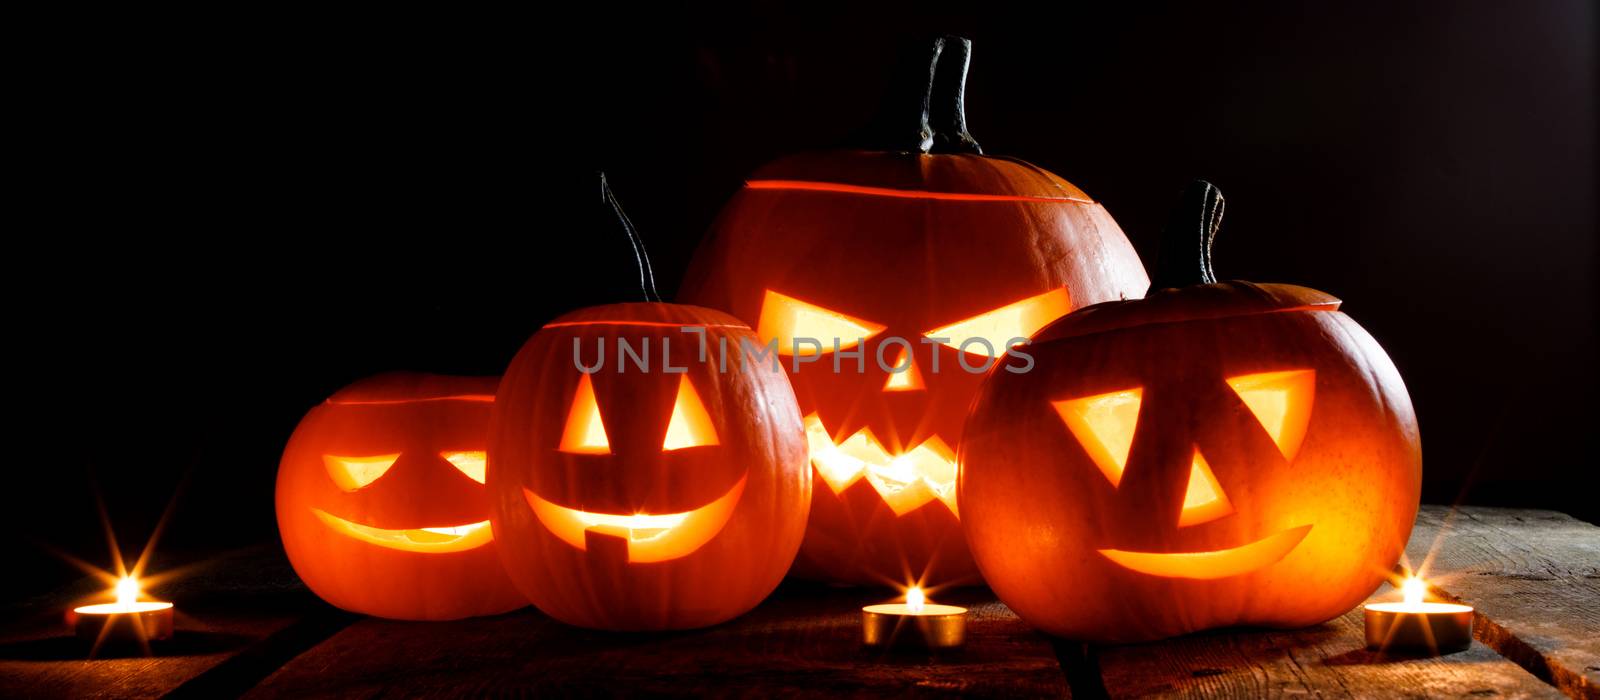 Halloween pumpkin heads jack o lantern and candles on wooden background